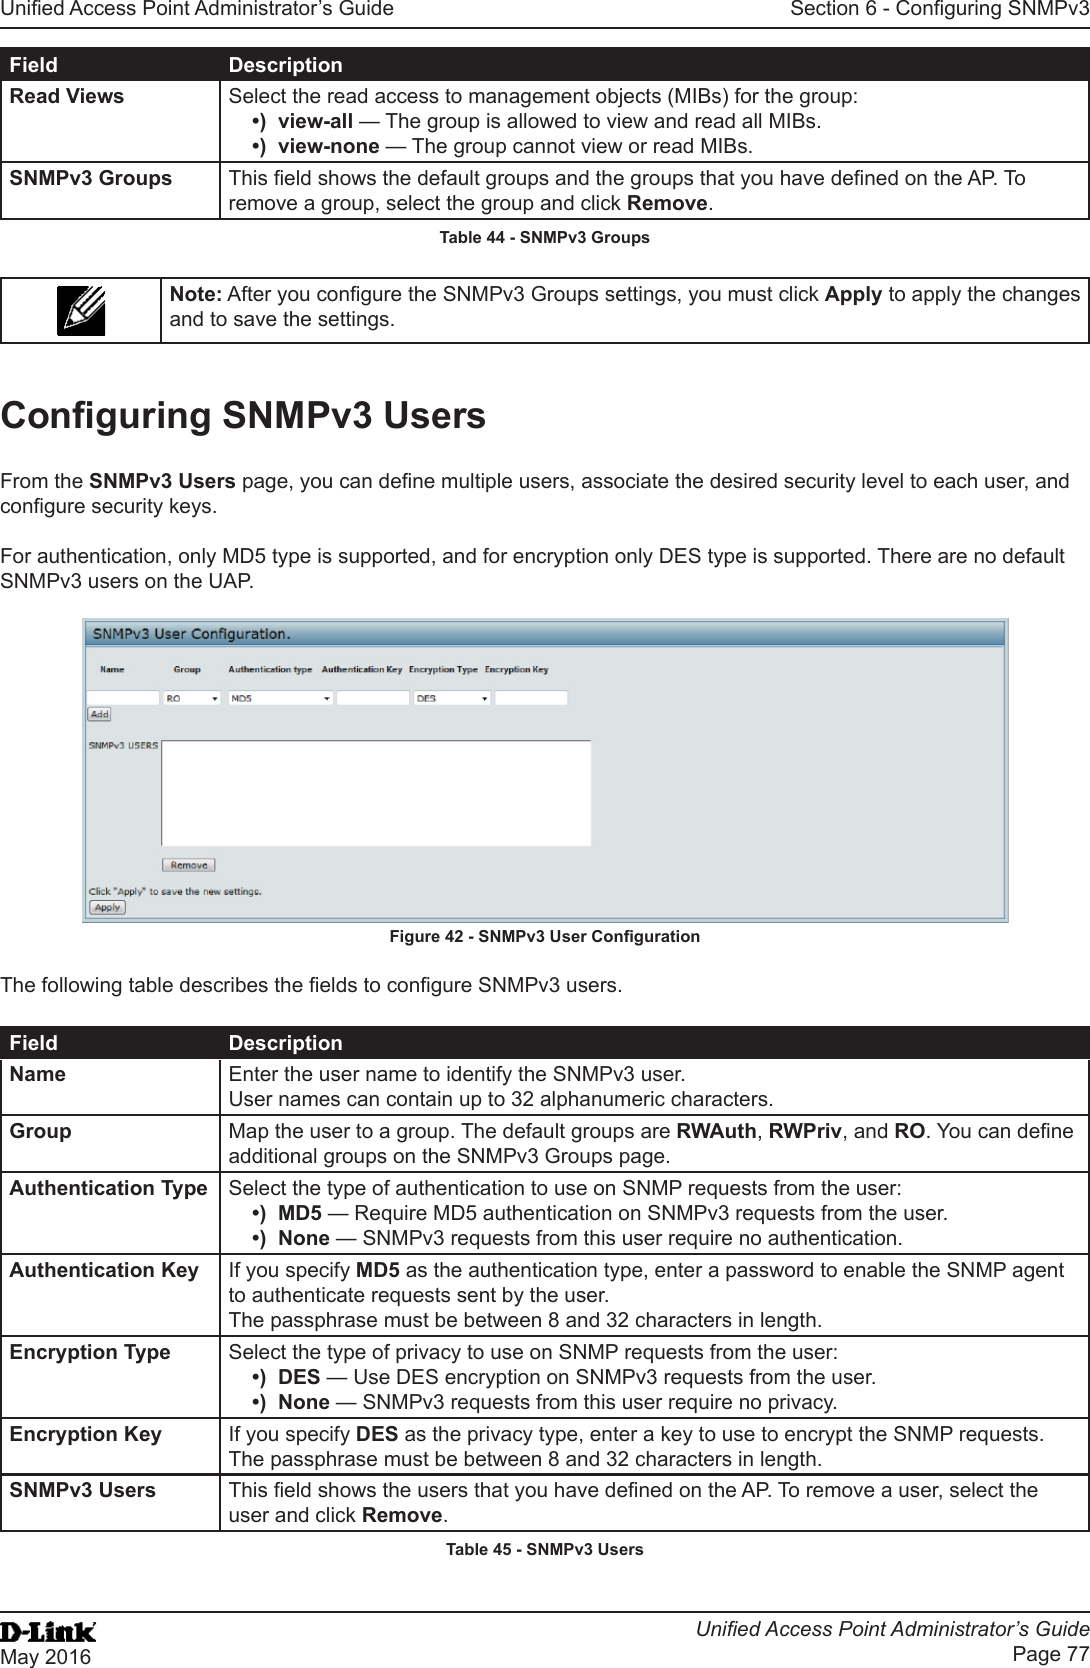 Unied Access Point Administrator’s GuideUnied Access Point Administrator’s GuidePage 77May 2016Section 6 - Conguring SNMPv3Field DescriptionRead Views Select the read access to management objects (MIBs) for the group:•)  view-all — The group is allowed to view and read all MIBs.•)  view-none — The group cannot view or read MIBs.SNMPv3 Groups This eld shows the default groups and the groups that you have dened on the AP. To remove a group, select the group and click Remove.Table 44 - SNMPv3 GroupsNote: After you congure the SNMPv3 Groups settings, you must click Apply to apply the changes and to save the settings.Conguring SNMPv3 UsersFrom the SNMPv3 Users page, you can dene multiple users, associate the desired security level to each user, and congure security keys.For authentication, only MD5 type is supported, and for encryption only DES type is supported. There are no default SNMPv3 users on the UAP.Figure 42 - SNMPv3 User CongurationThe following table describes the elds to congure SNMPv3 users.Field DescriptionName Enter the user name to identify the SNMPv3 user. User names can contain up to 32 alphanumeric characters.Group Map the user to a group. The default groups are RWAuth, RWPriv, and RO. You can dene additional groups on the SNMPv3 Groups page.Authentication Type Select the type of authentication to use on SNMP requests from the user:•)  MD5 — Require MD5 authentication on SNMPv3 requests from the user.•)  None — SNMPv3 requests from this user require no authentication.Authentication Key If you specify MD5 as the authentication type, enter a password to enable the SNMP agent to authenticate requests sent by the user.The passphrase must be between 8 and 32 characters in length.Encryption Type Select the type of privacy to use on SNMP requests from the user:•)  DES — Use DES encryption on SNMPv3 requests from the user.•)  None — SNMPv3 requests from this user require no privacy.Encryption Key If you specify DES as the privacy type, enter a key to use to encrypt the SNMP requests.The passphrase must be between 8 and 32 characters in length.SNMPv3 Users This eld shows the users that you have dened on the AP. To remove a user, select the user and click Remove.Table 45 - SNMPv3 Users